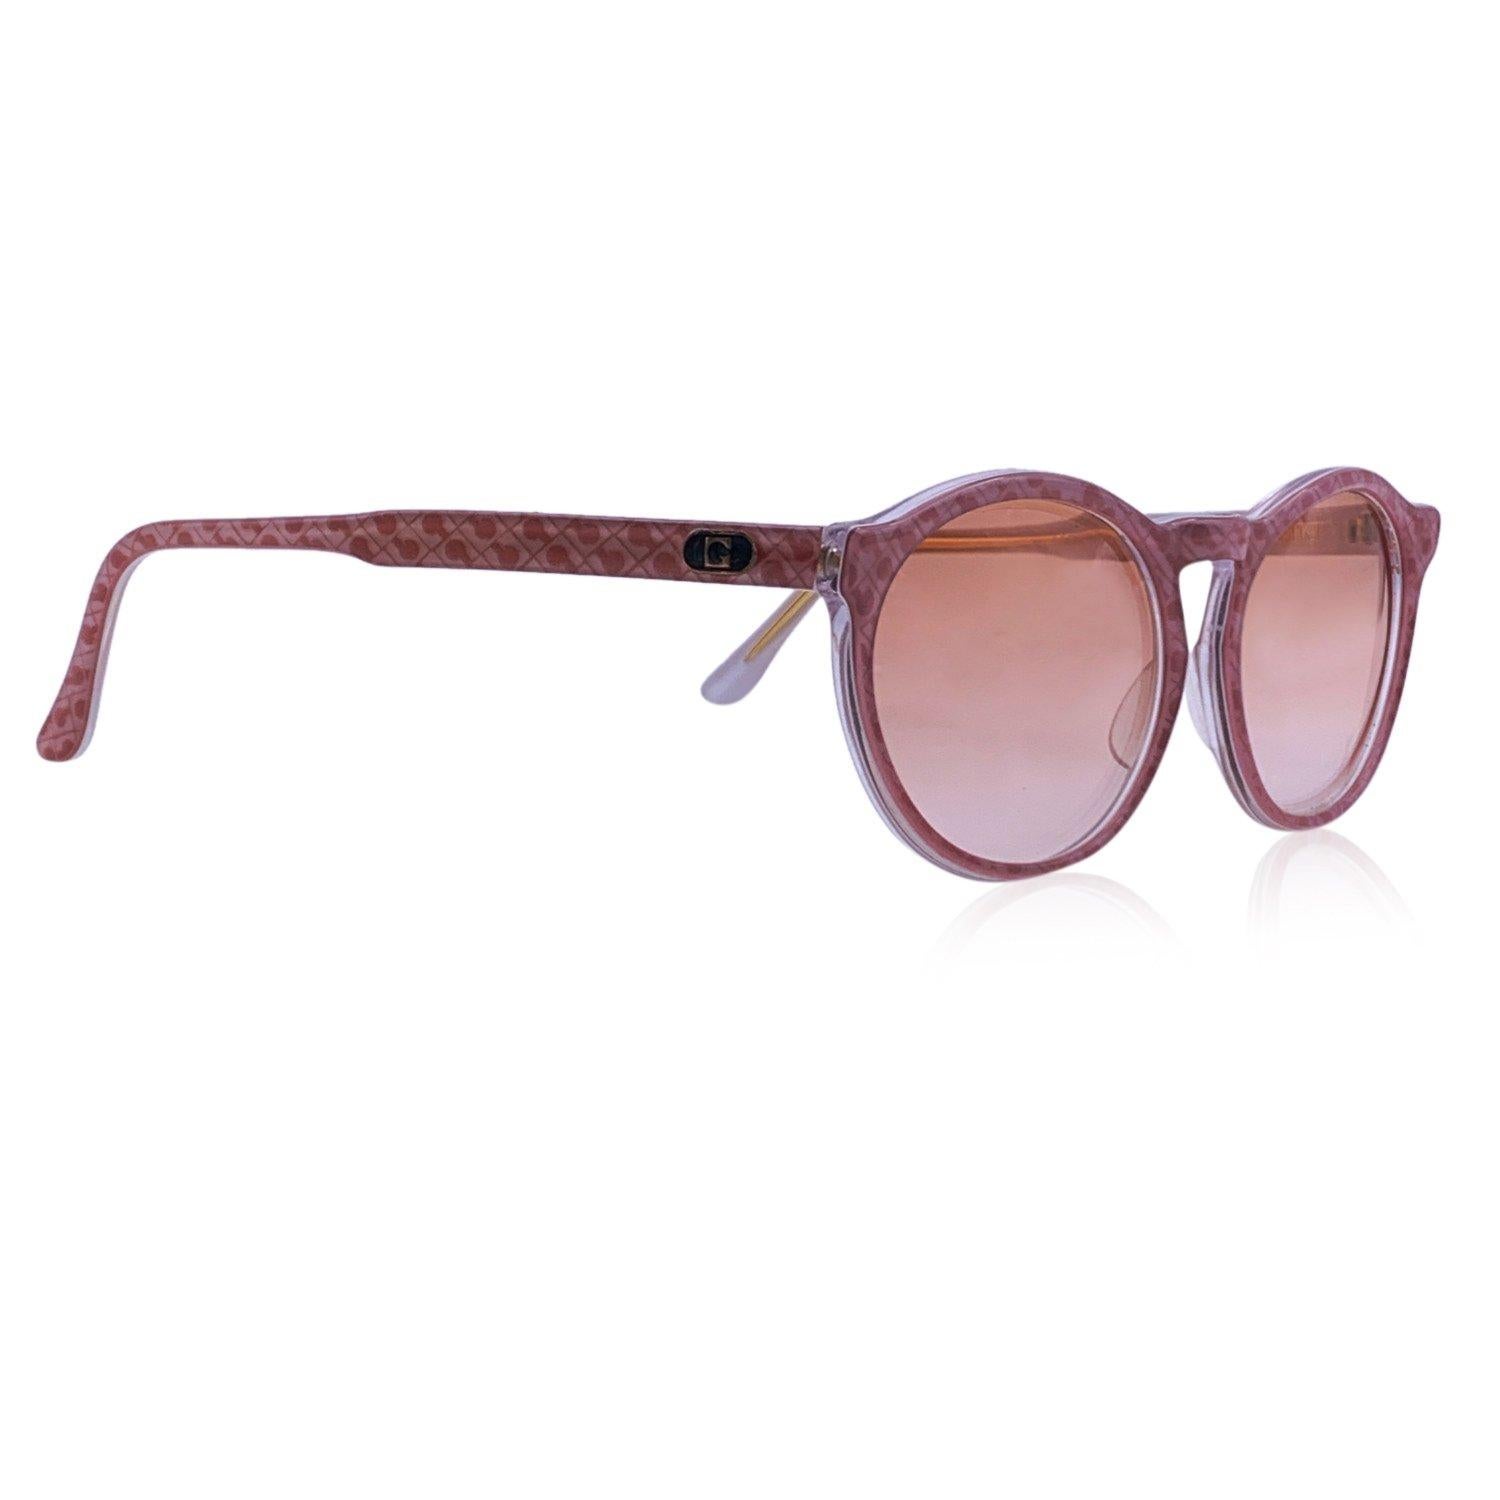 Vintage Gherardini sunglasses G/2. Pink acetate frame with logo pattern. Original 100% Total UVA/UVB protection in gradient brown color. Gherardini logo on temples. Made in Italy Details MATERIAL: Acetate COLOR: Pink MODEL: G/2 GENDER: Women COUNTRY